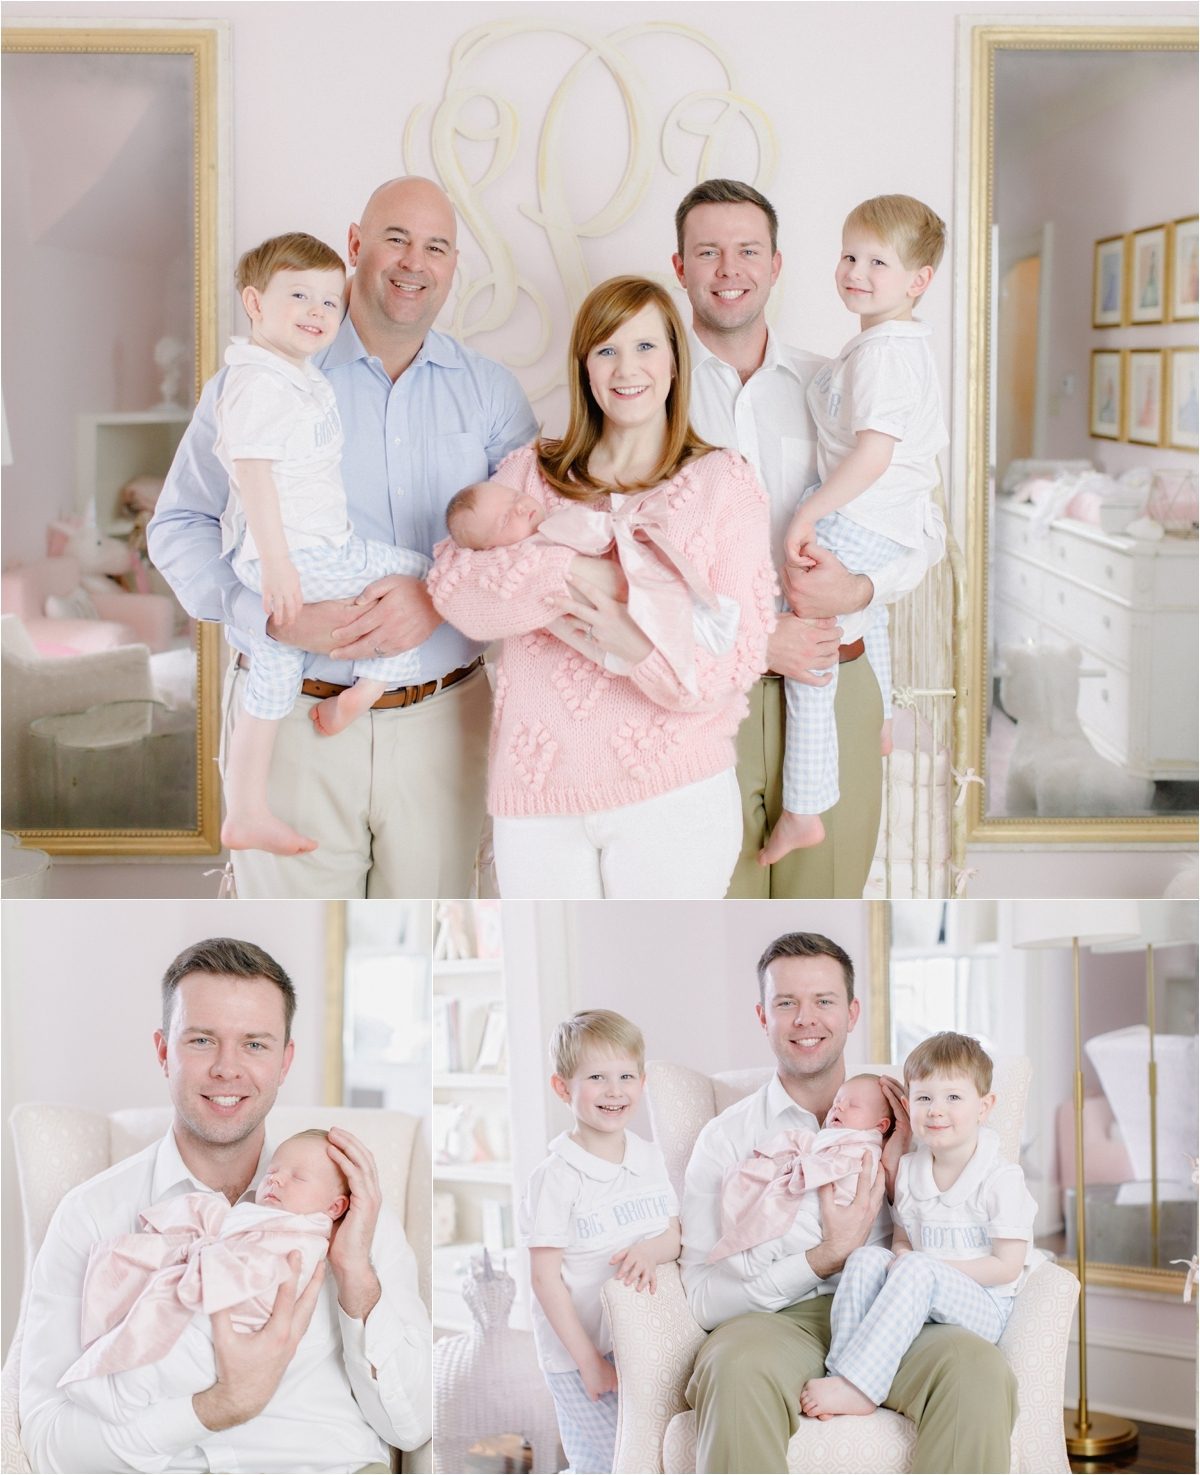 Newborn family pictures taken in Knoxville, GA.